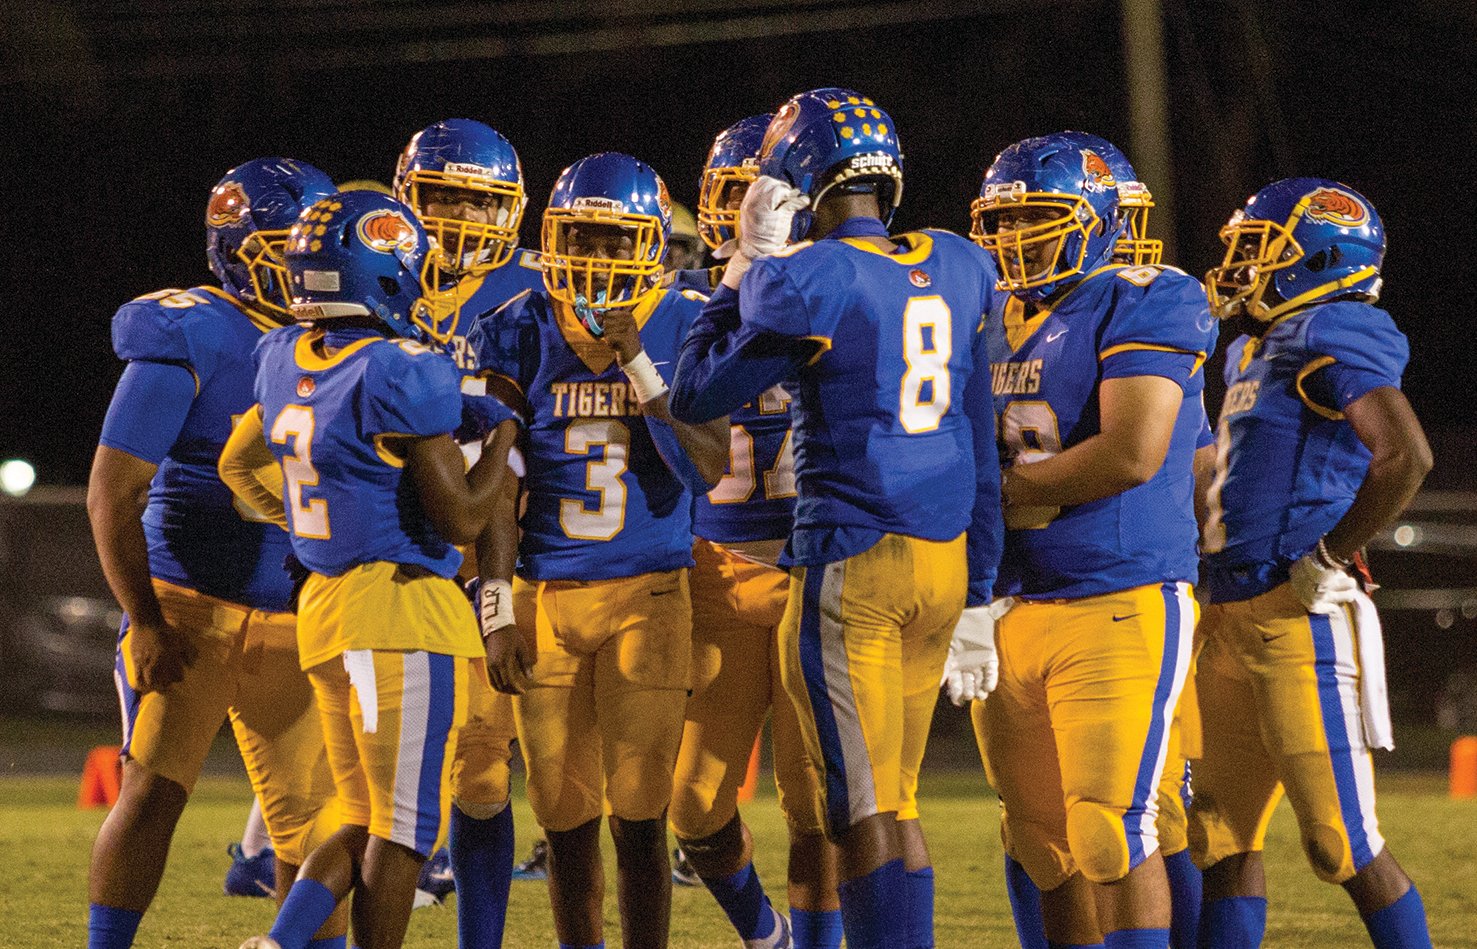 The Clewiston Tigers bounced back from last week’s loss to Calvary Christian.